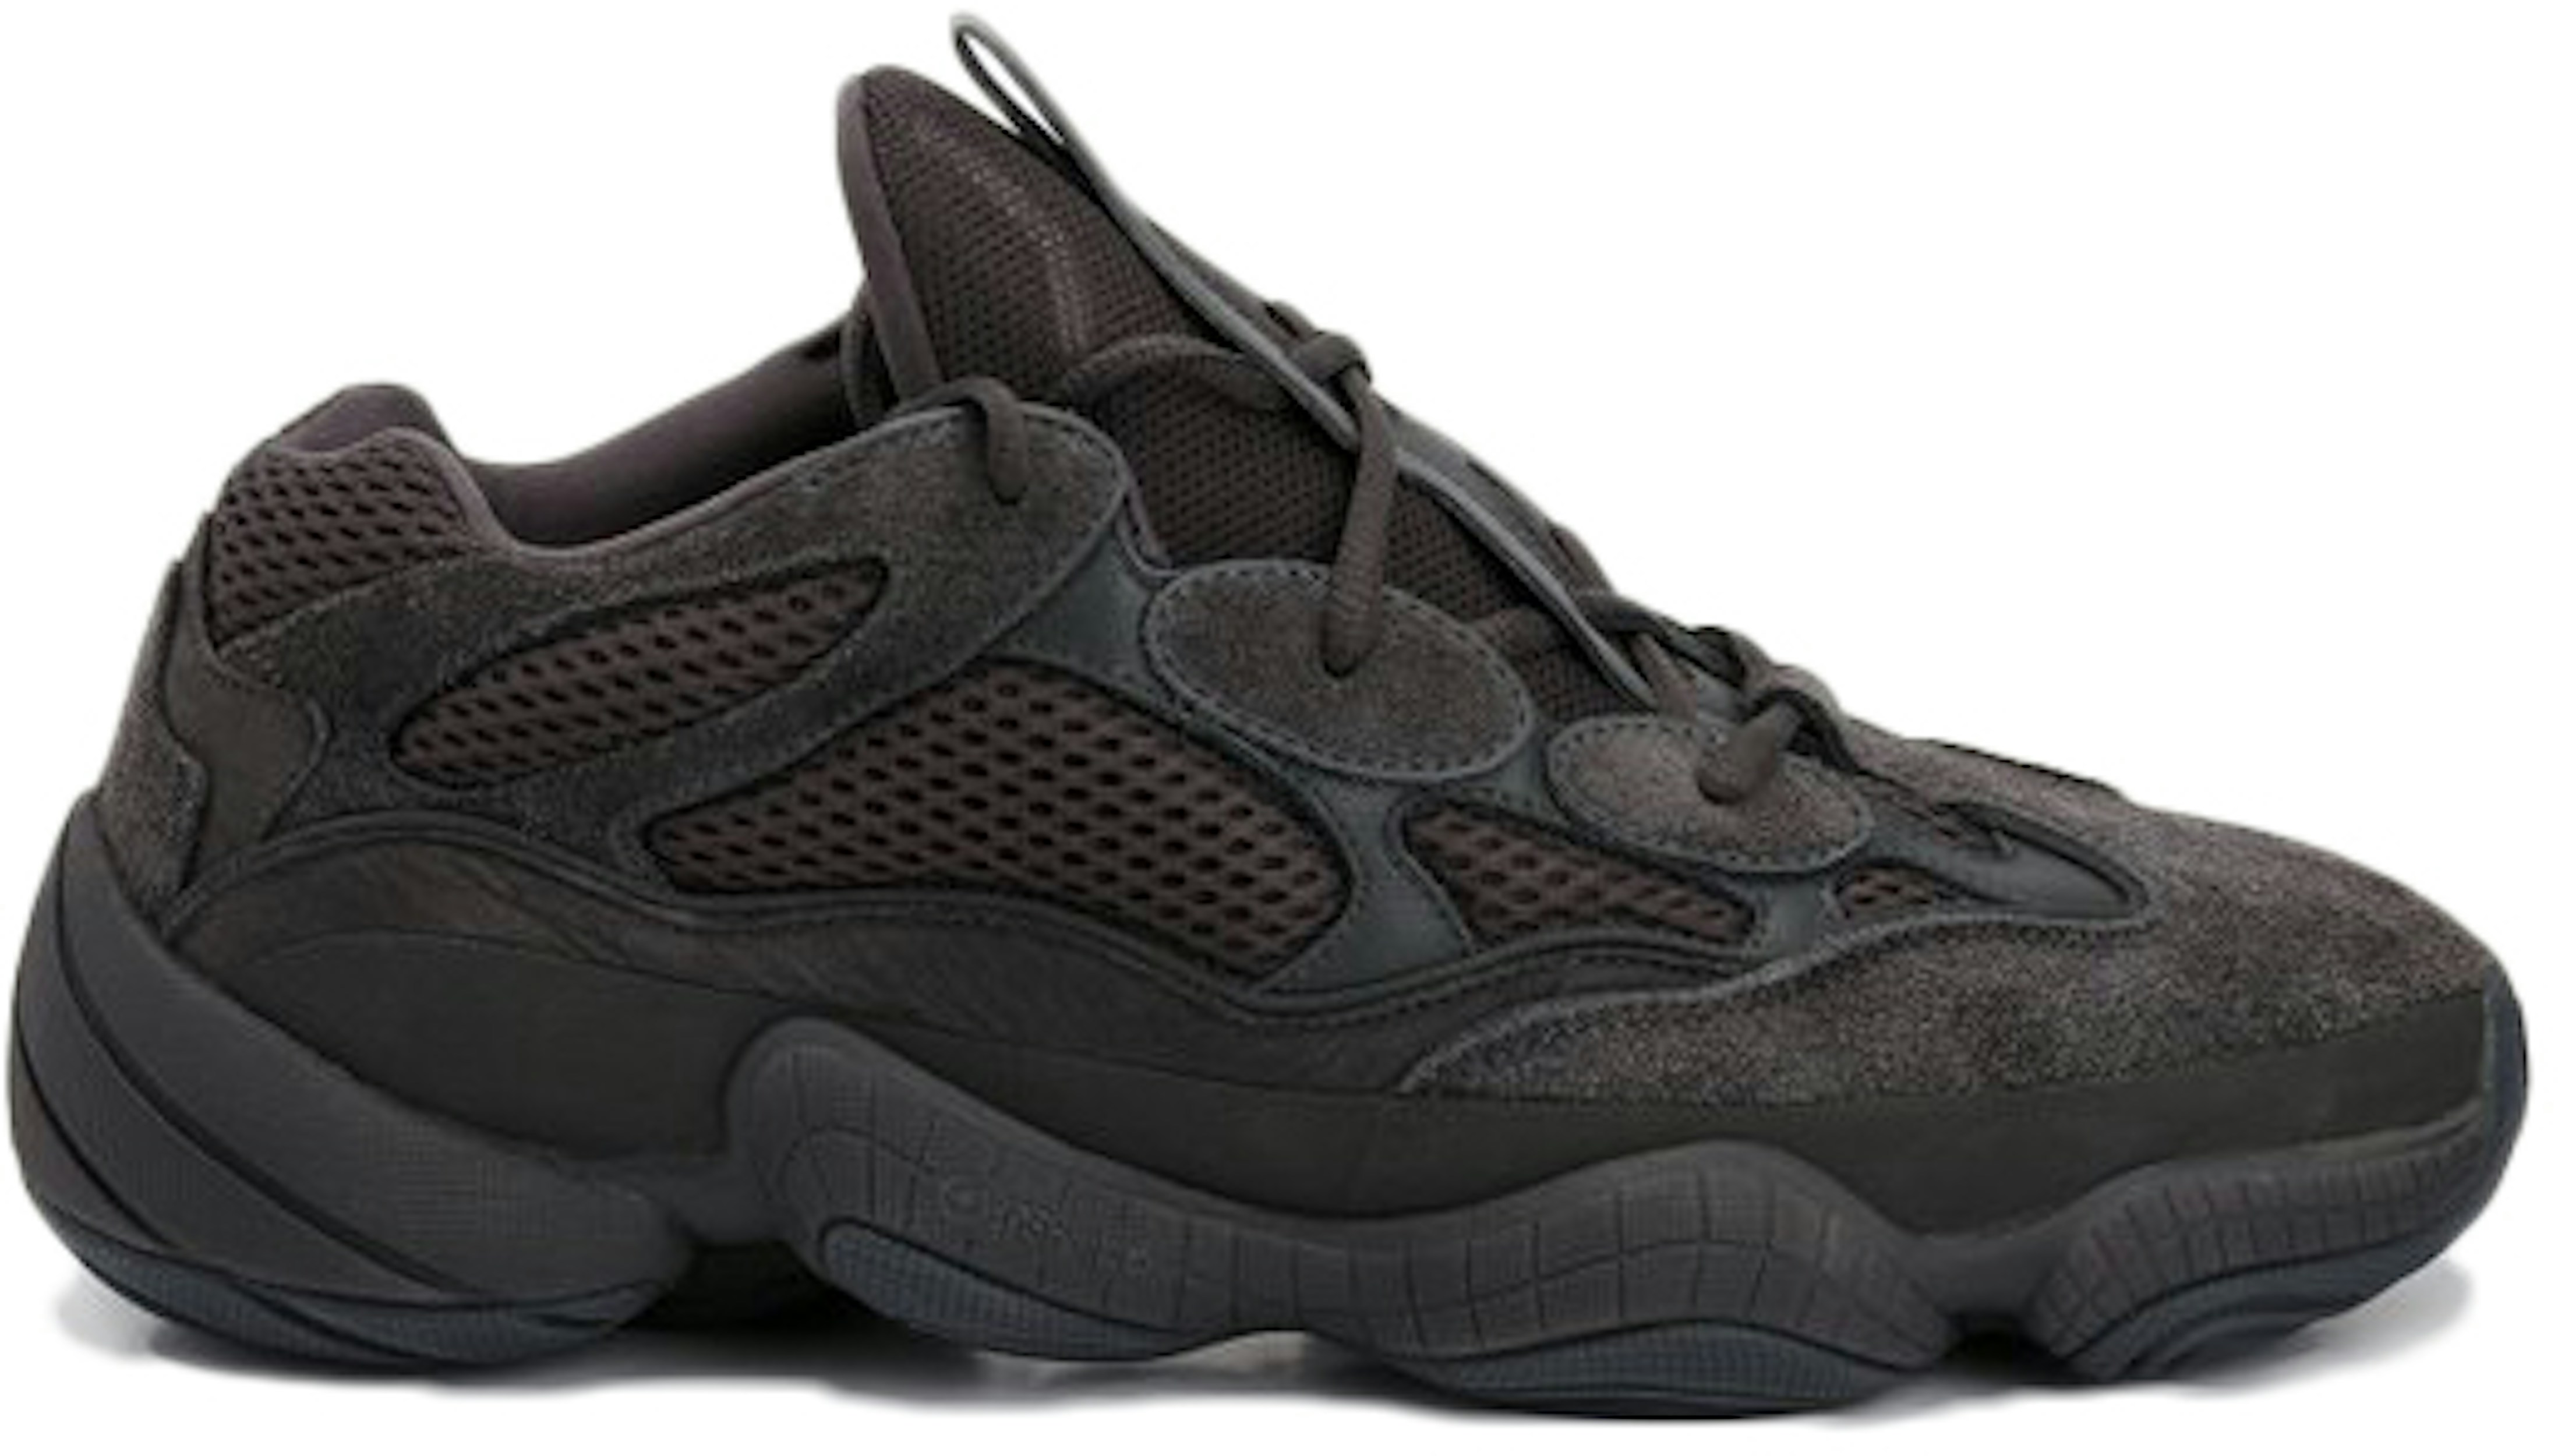 adidas Yeezy 500 Shadow Black (Friends & Family) - Sneakers